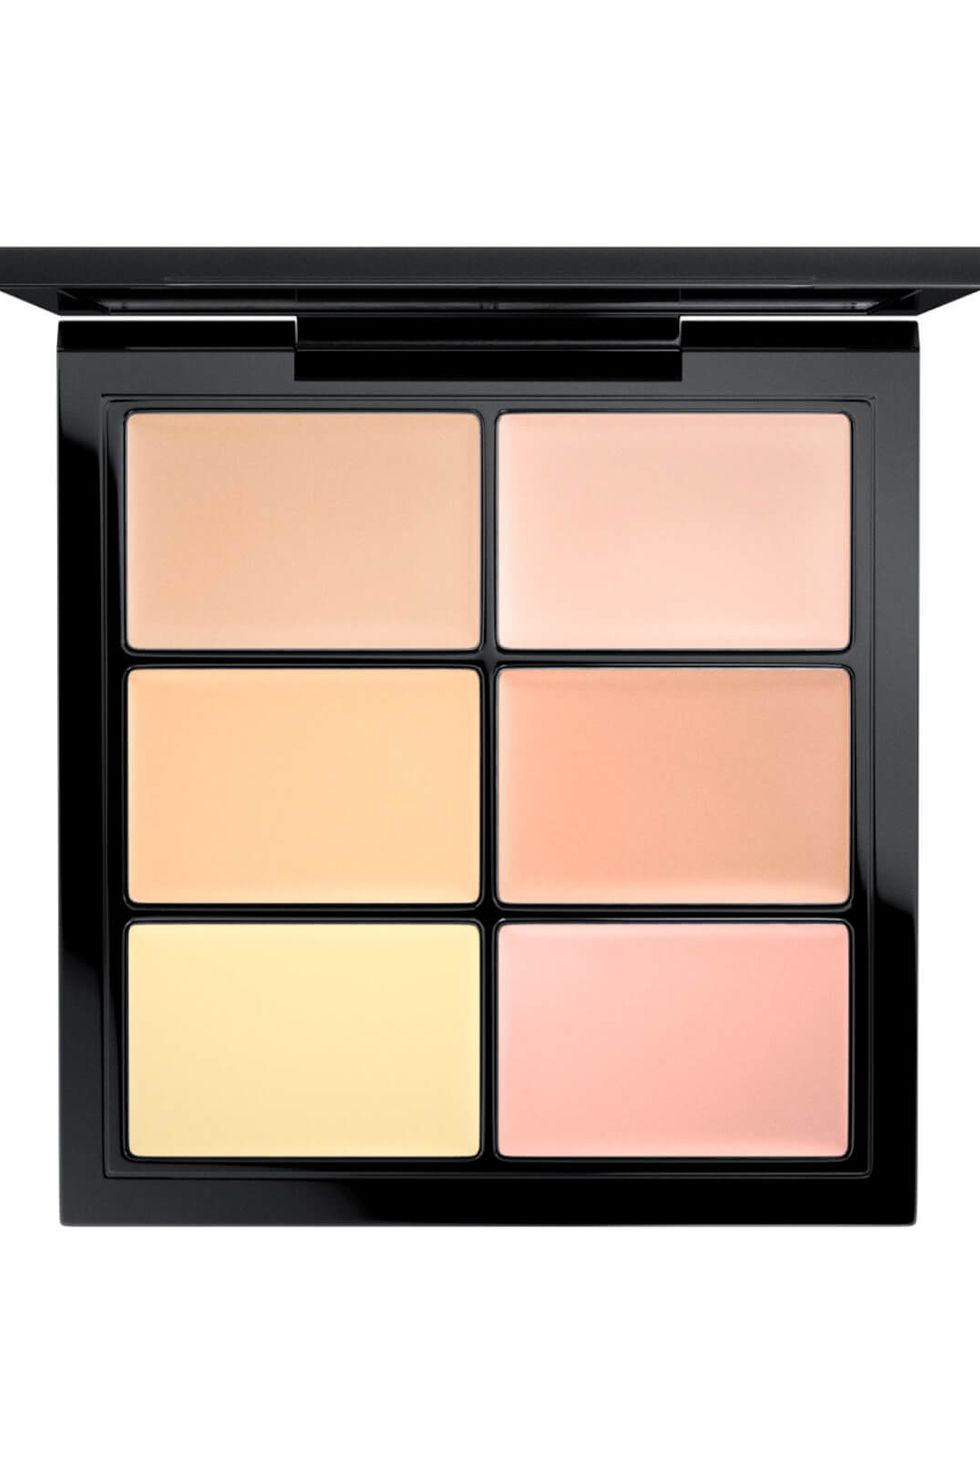 Studio Fix Conceal and Correct Palette 